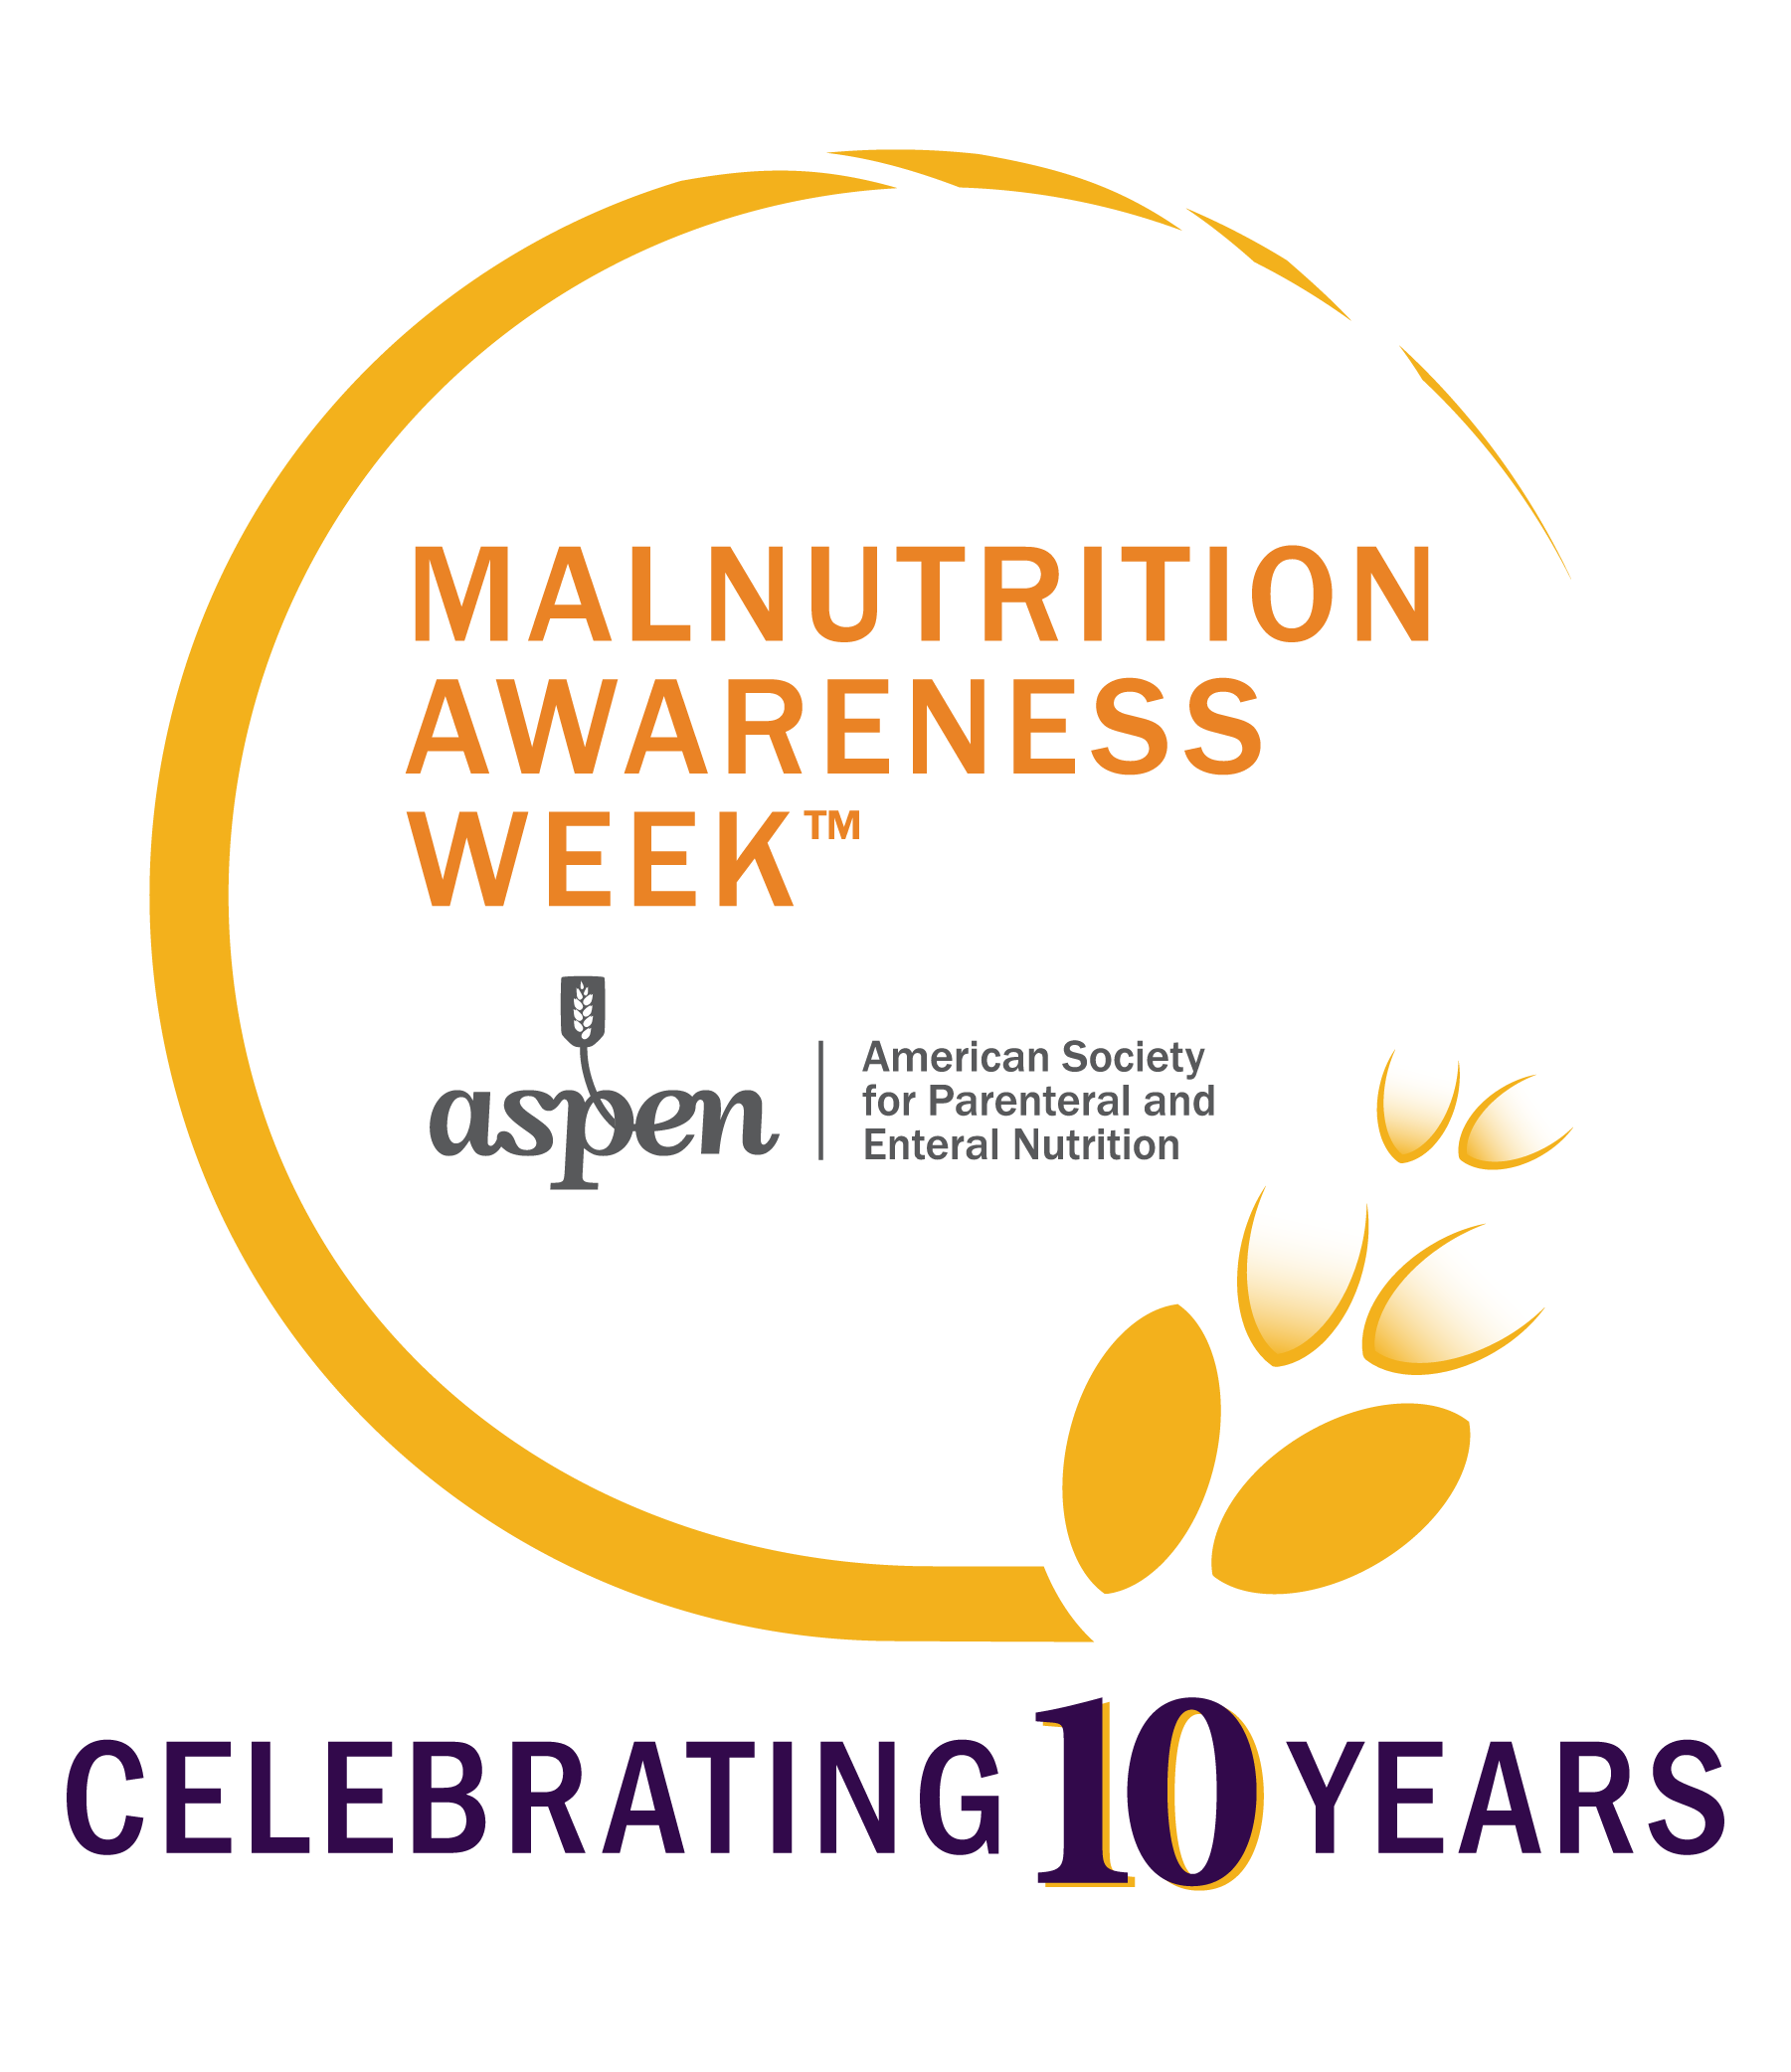 Malnutrition Awareness Week. Celebrating 10 Years. American Society for Parenteral and Enteral Nutrition.